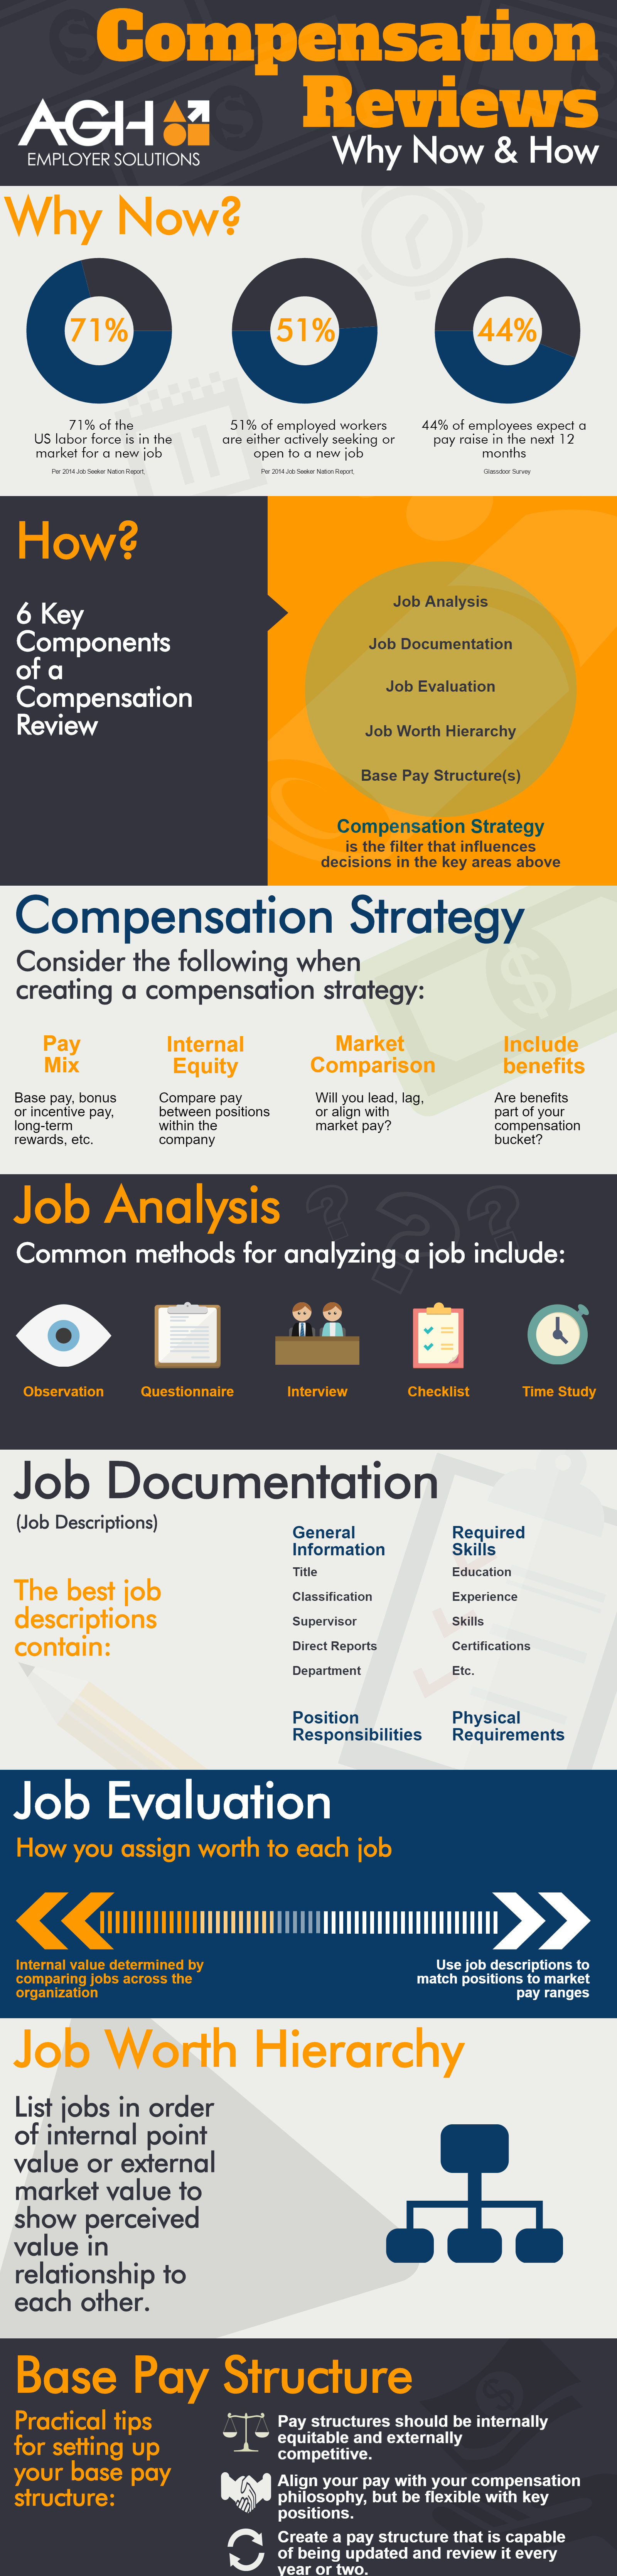 How to conduct a compensation review infographic